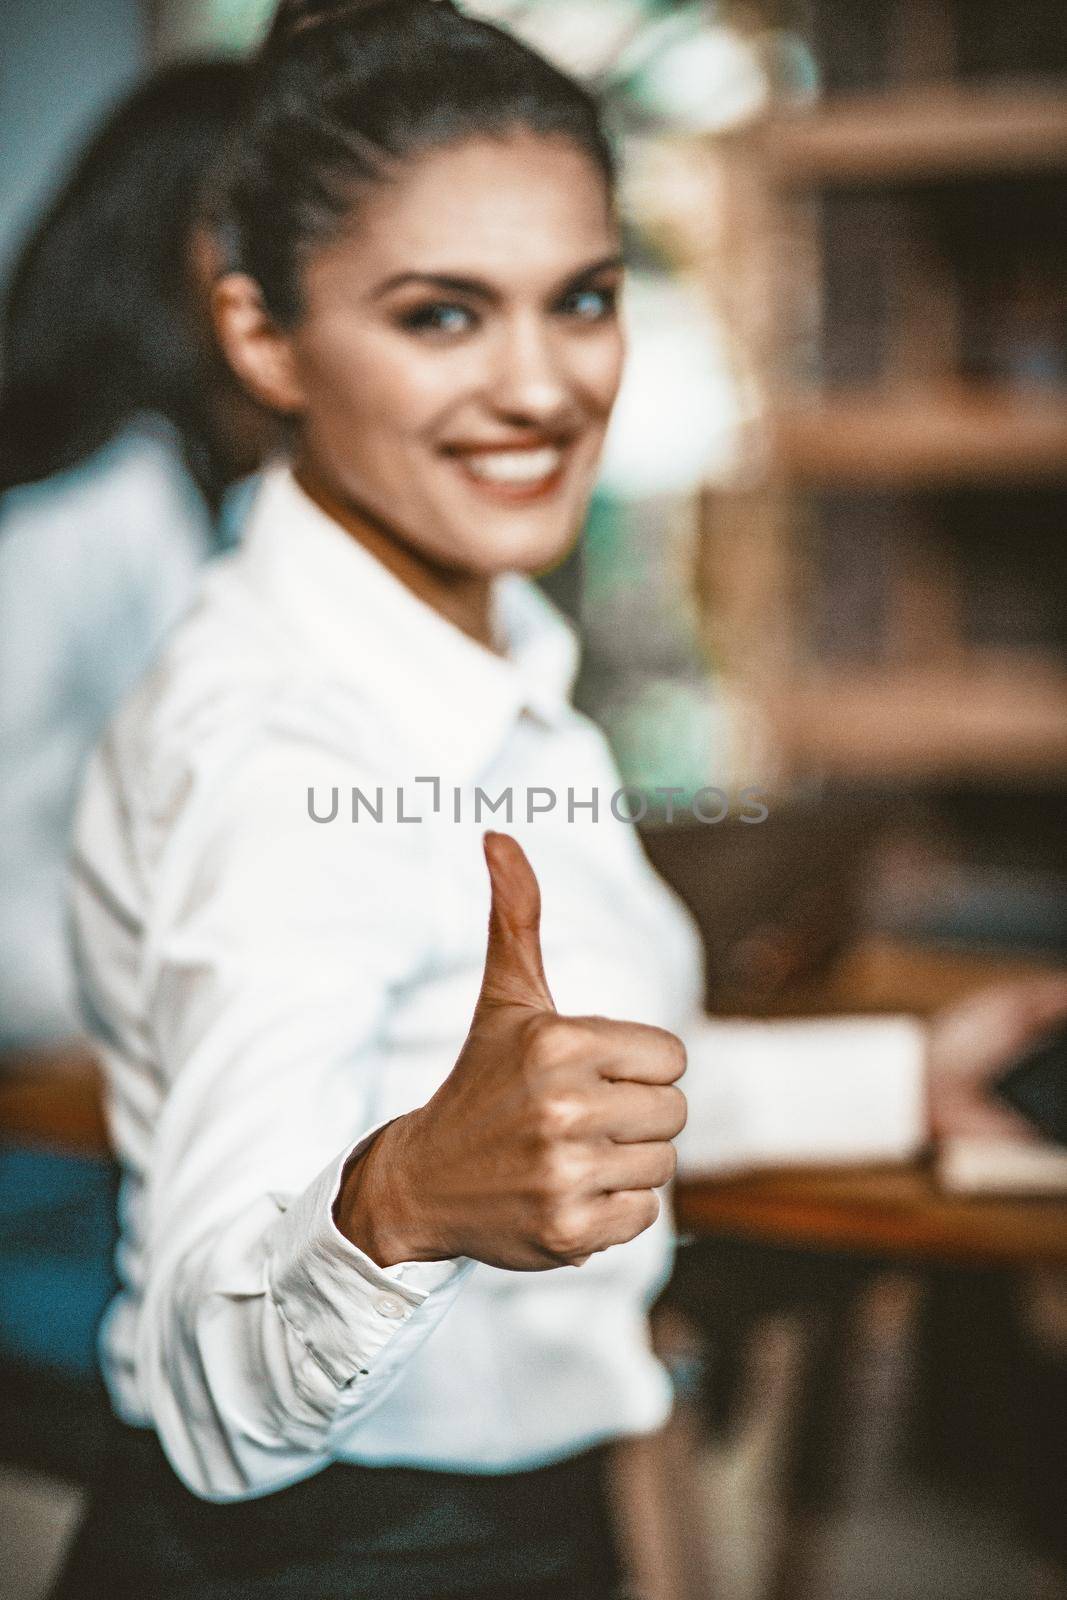 Portrait Of Cheerful Business Lady Showing Big Thumb In Approval In Office, Selective Focus On Female Hand Foreground, Close Up Shot, Toned Image